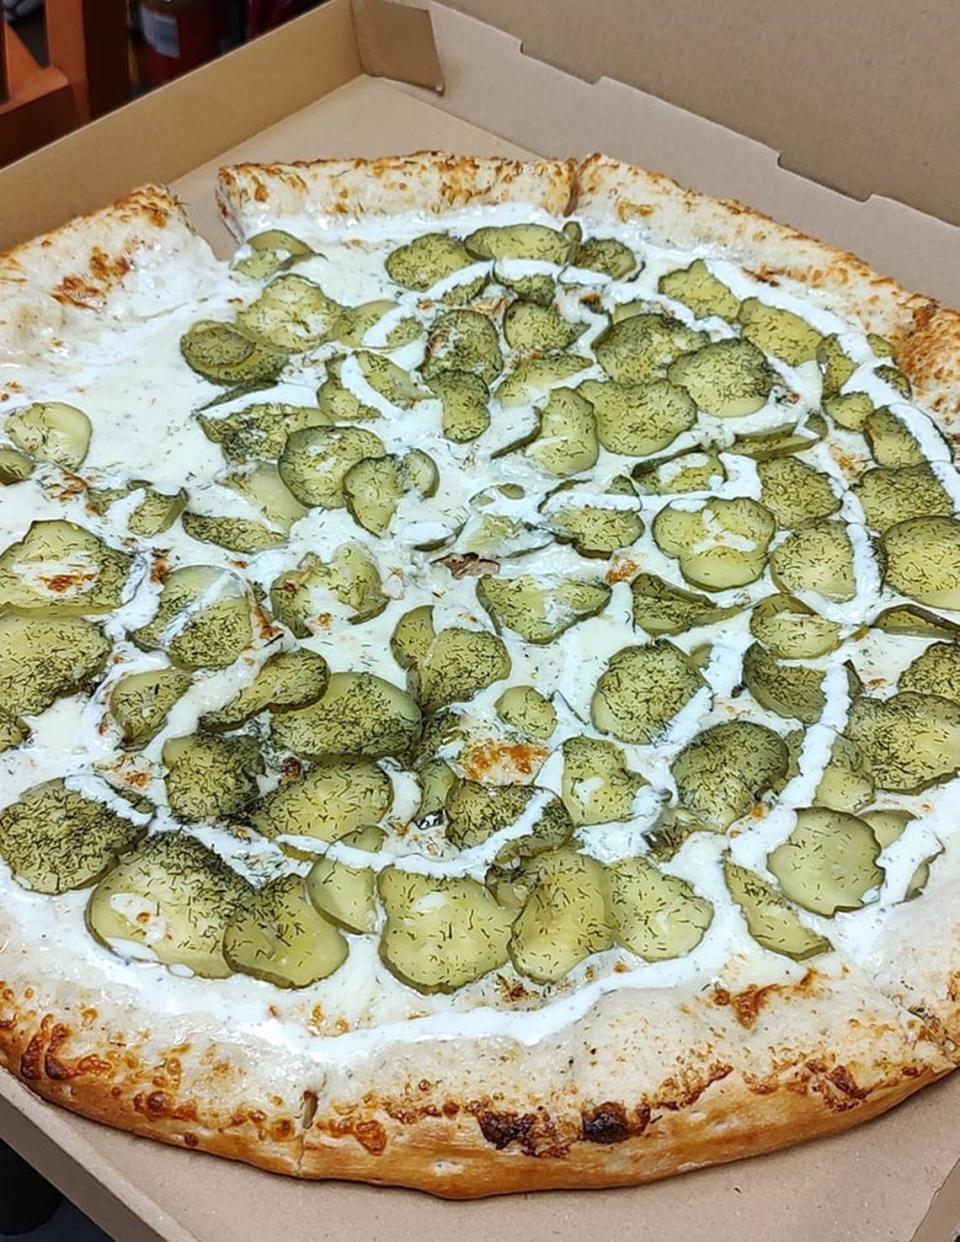 An image of dill pickle pizza.